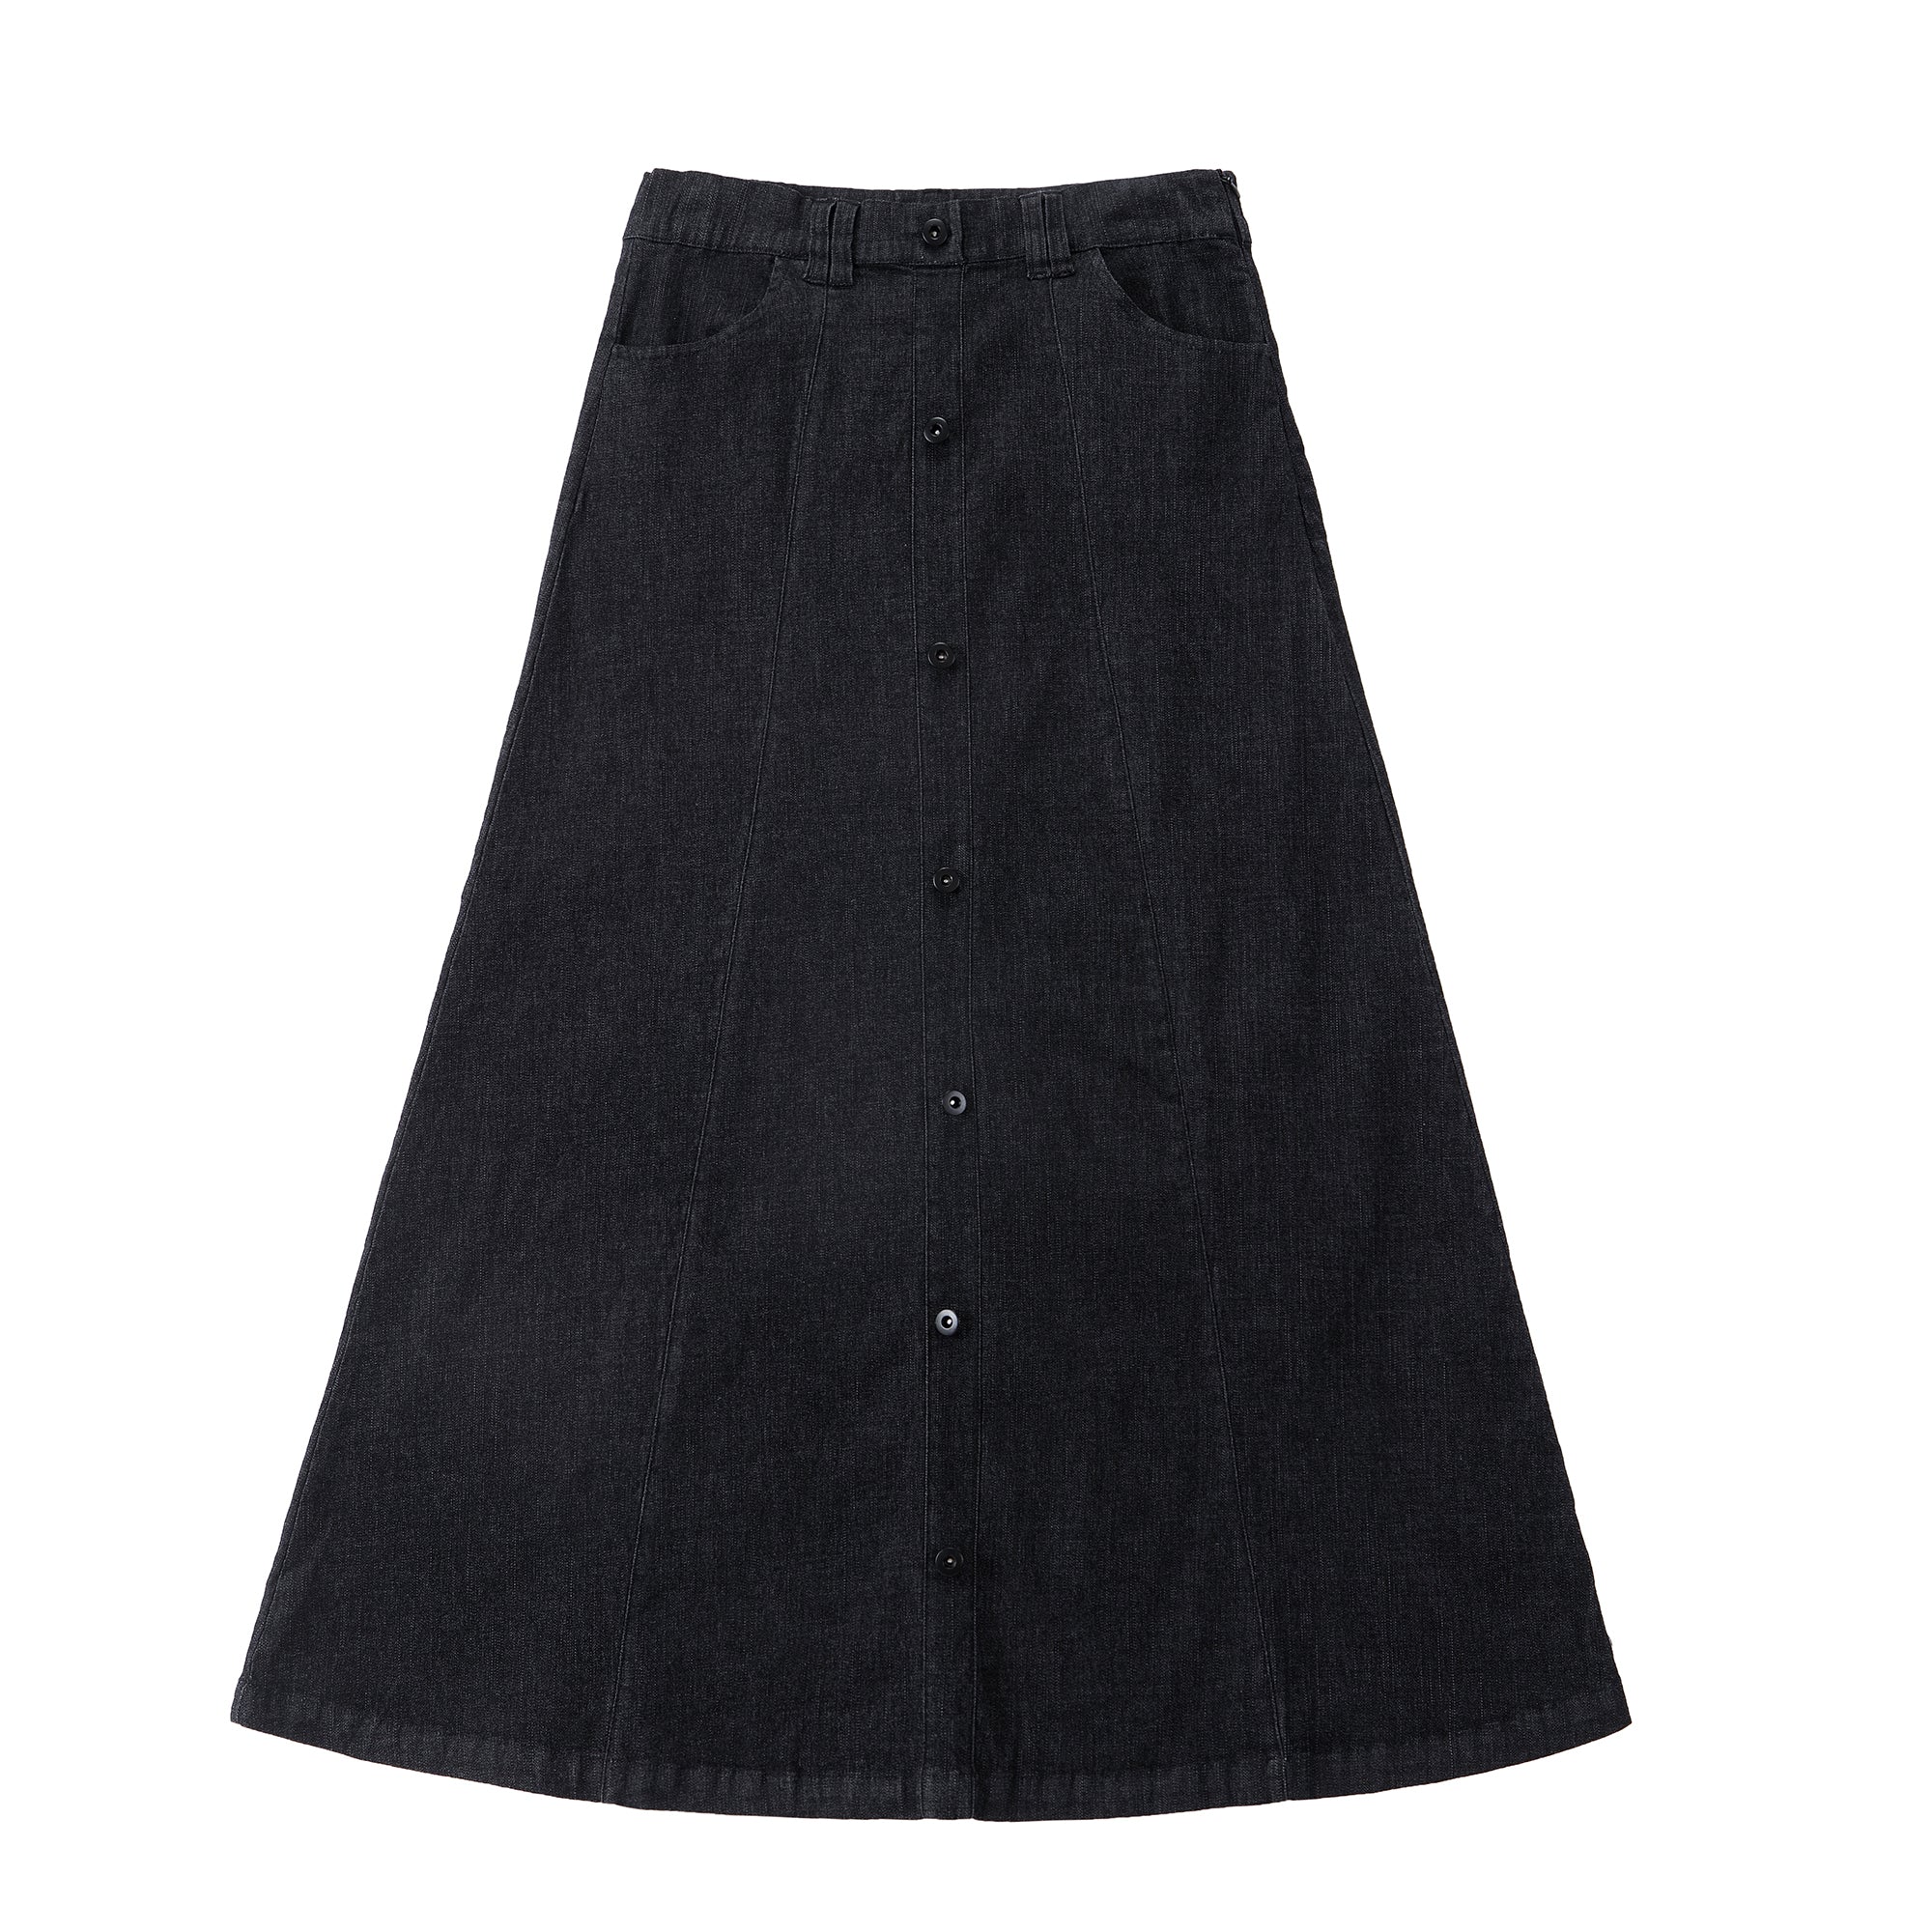 Black Denim Maxi Skirt With Button Front